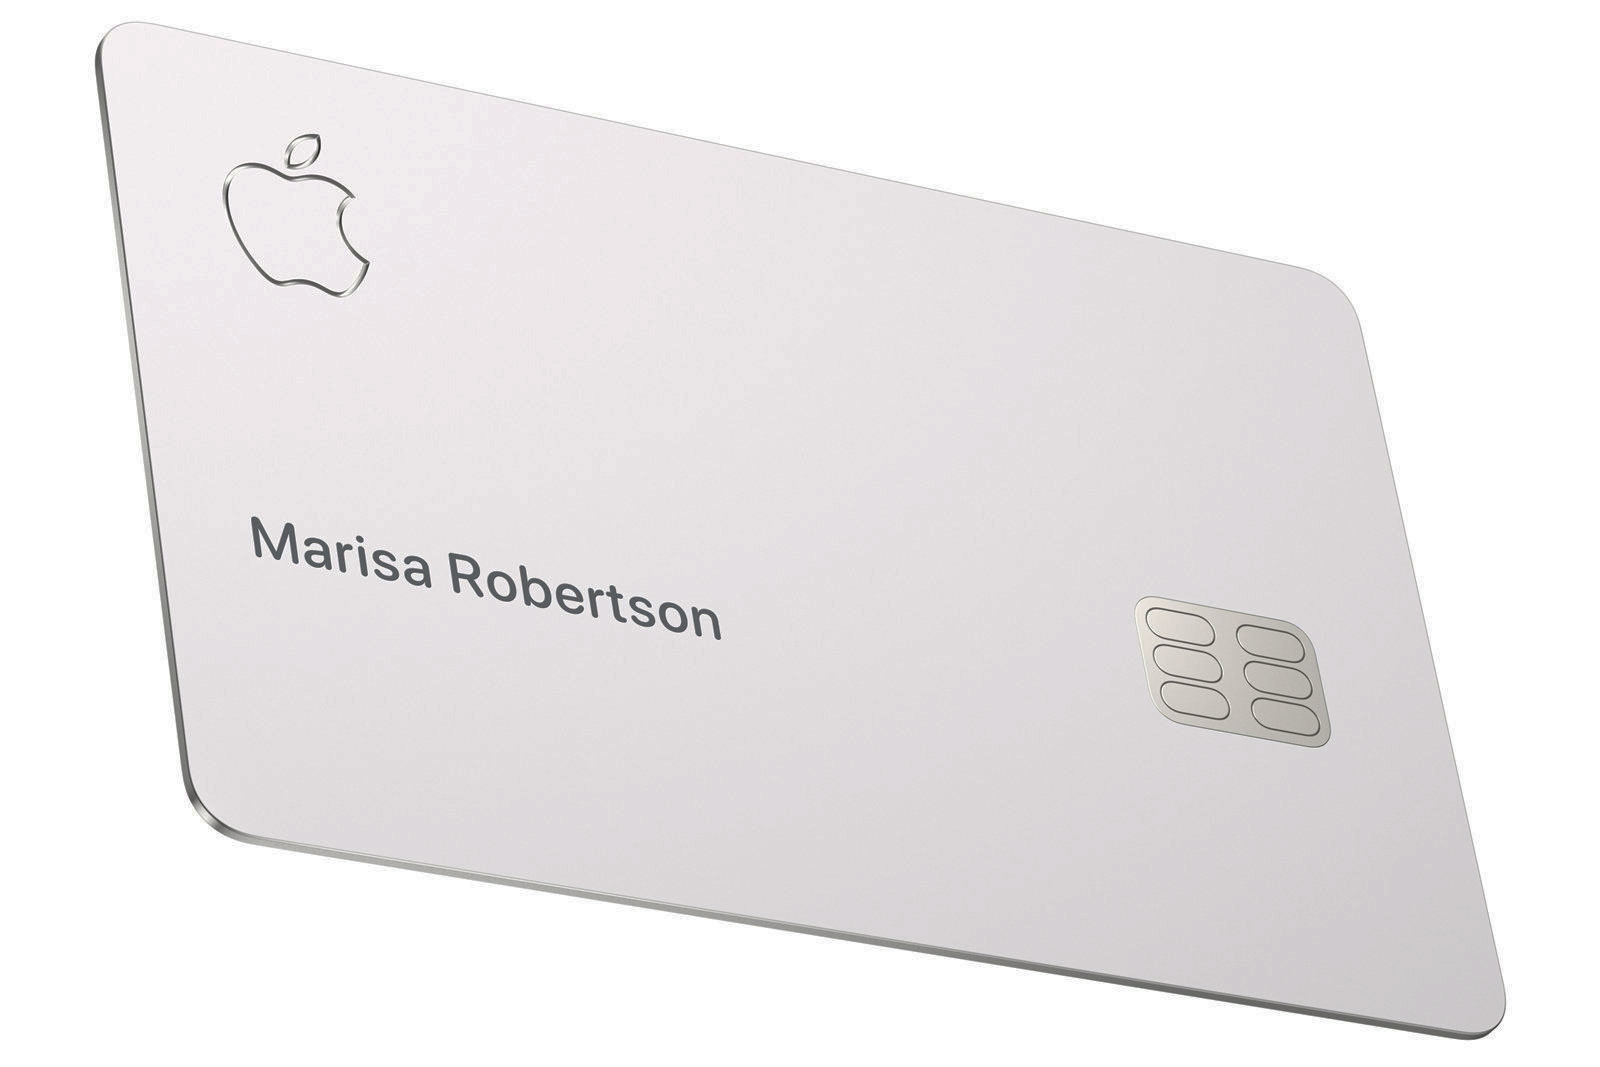 Apple Card holders can skip March payment due to impact of coronavirus | DeviceDaily.com